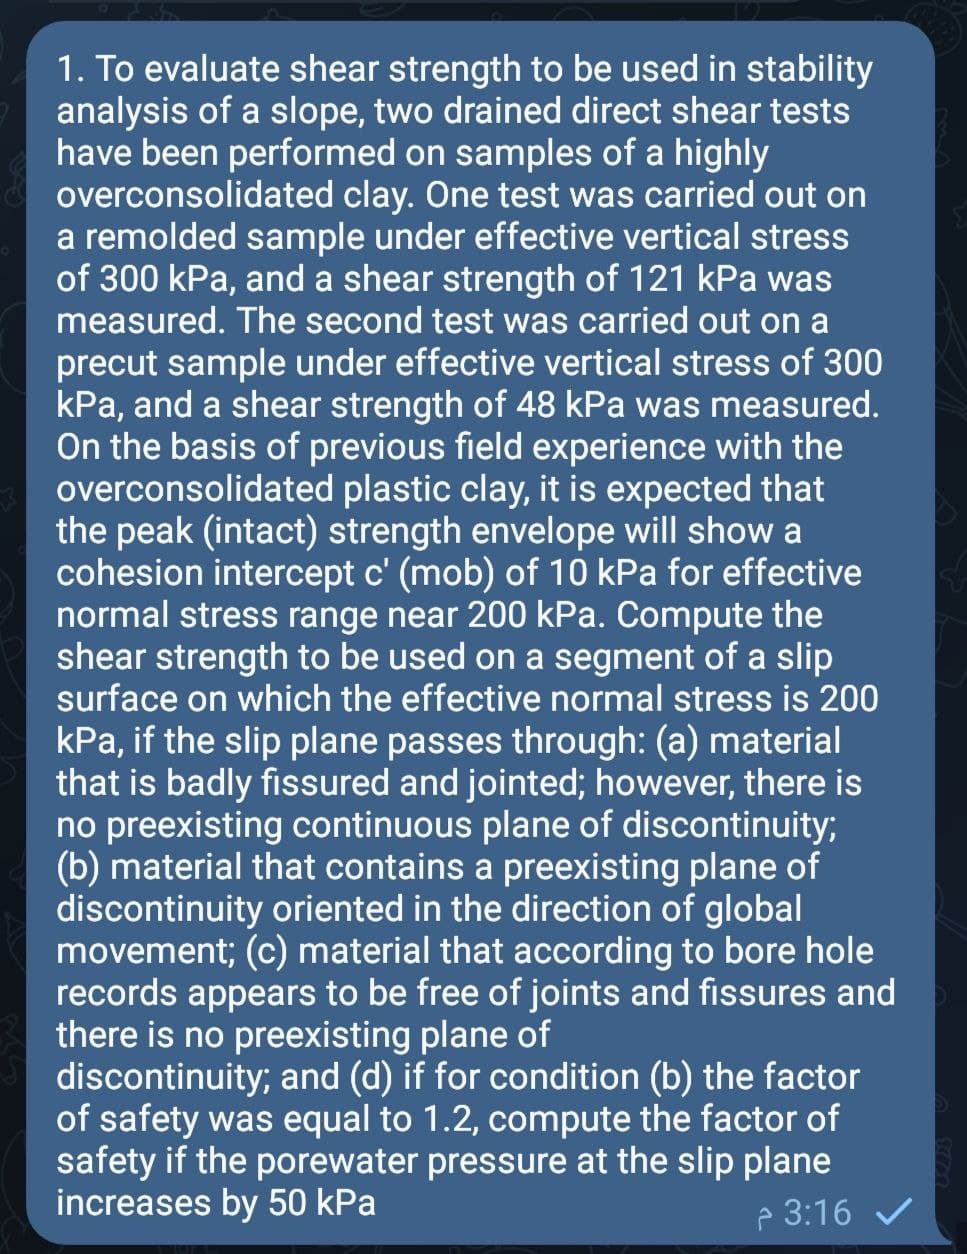 1. To evaluate shear strength to be used in stability
analysis of a slope, two drained direct shear tests
have been performed on samples of a highly
overconsolidated clay. One test was carried out on
a remolded sample under effective vertical stress
of 300 kPa, and a shear strength of 121 kPa was
measured. The second test was carried out on a
precut sample under effective vertical stress of 300
kPa, and a shear strength of 48 kPa was measured.
On the basis of previous field experience with the
overconsolidated plastic clay, it is expected that
the peak (intact) strength envelope will show a
cohesion intercept c' (mob) of 10 kPa for effective
normal stress range near 200 kPa. Compute the
shear strength to be used on a segment of a slip
surface on which the effective normal stress is 200
kPa, if the slip plane passes through: (a) material
that is badly fissured and jointed; however, there is
no preexisting continuous plane of discontinuity;
(b) material that contains a preexisting plane of
discontinuity oriented in the direction of global
movement; (c) material that according to bore hole
records appears to be free of joints and fissures and
there is no preexisting plane of
discontinuity; and (d) if for condition (b) the factor
of safety was equal to 1.2, compute the factor of
safety if the porewater pressure at the slip plane
increases by 50 kPa
e 3:16 /
